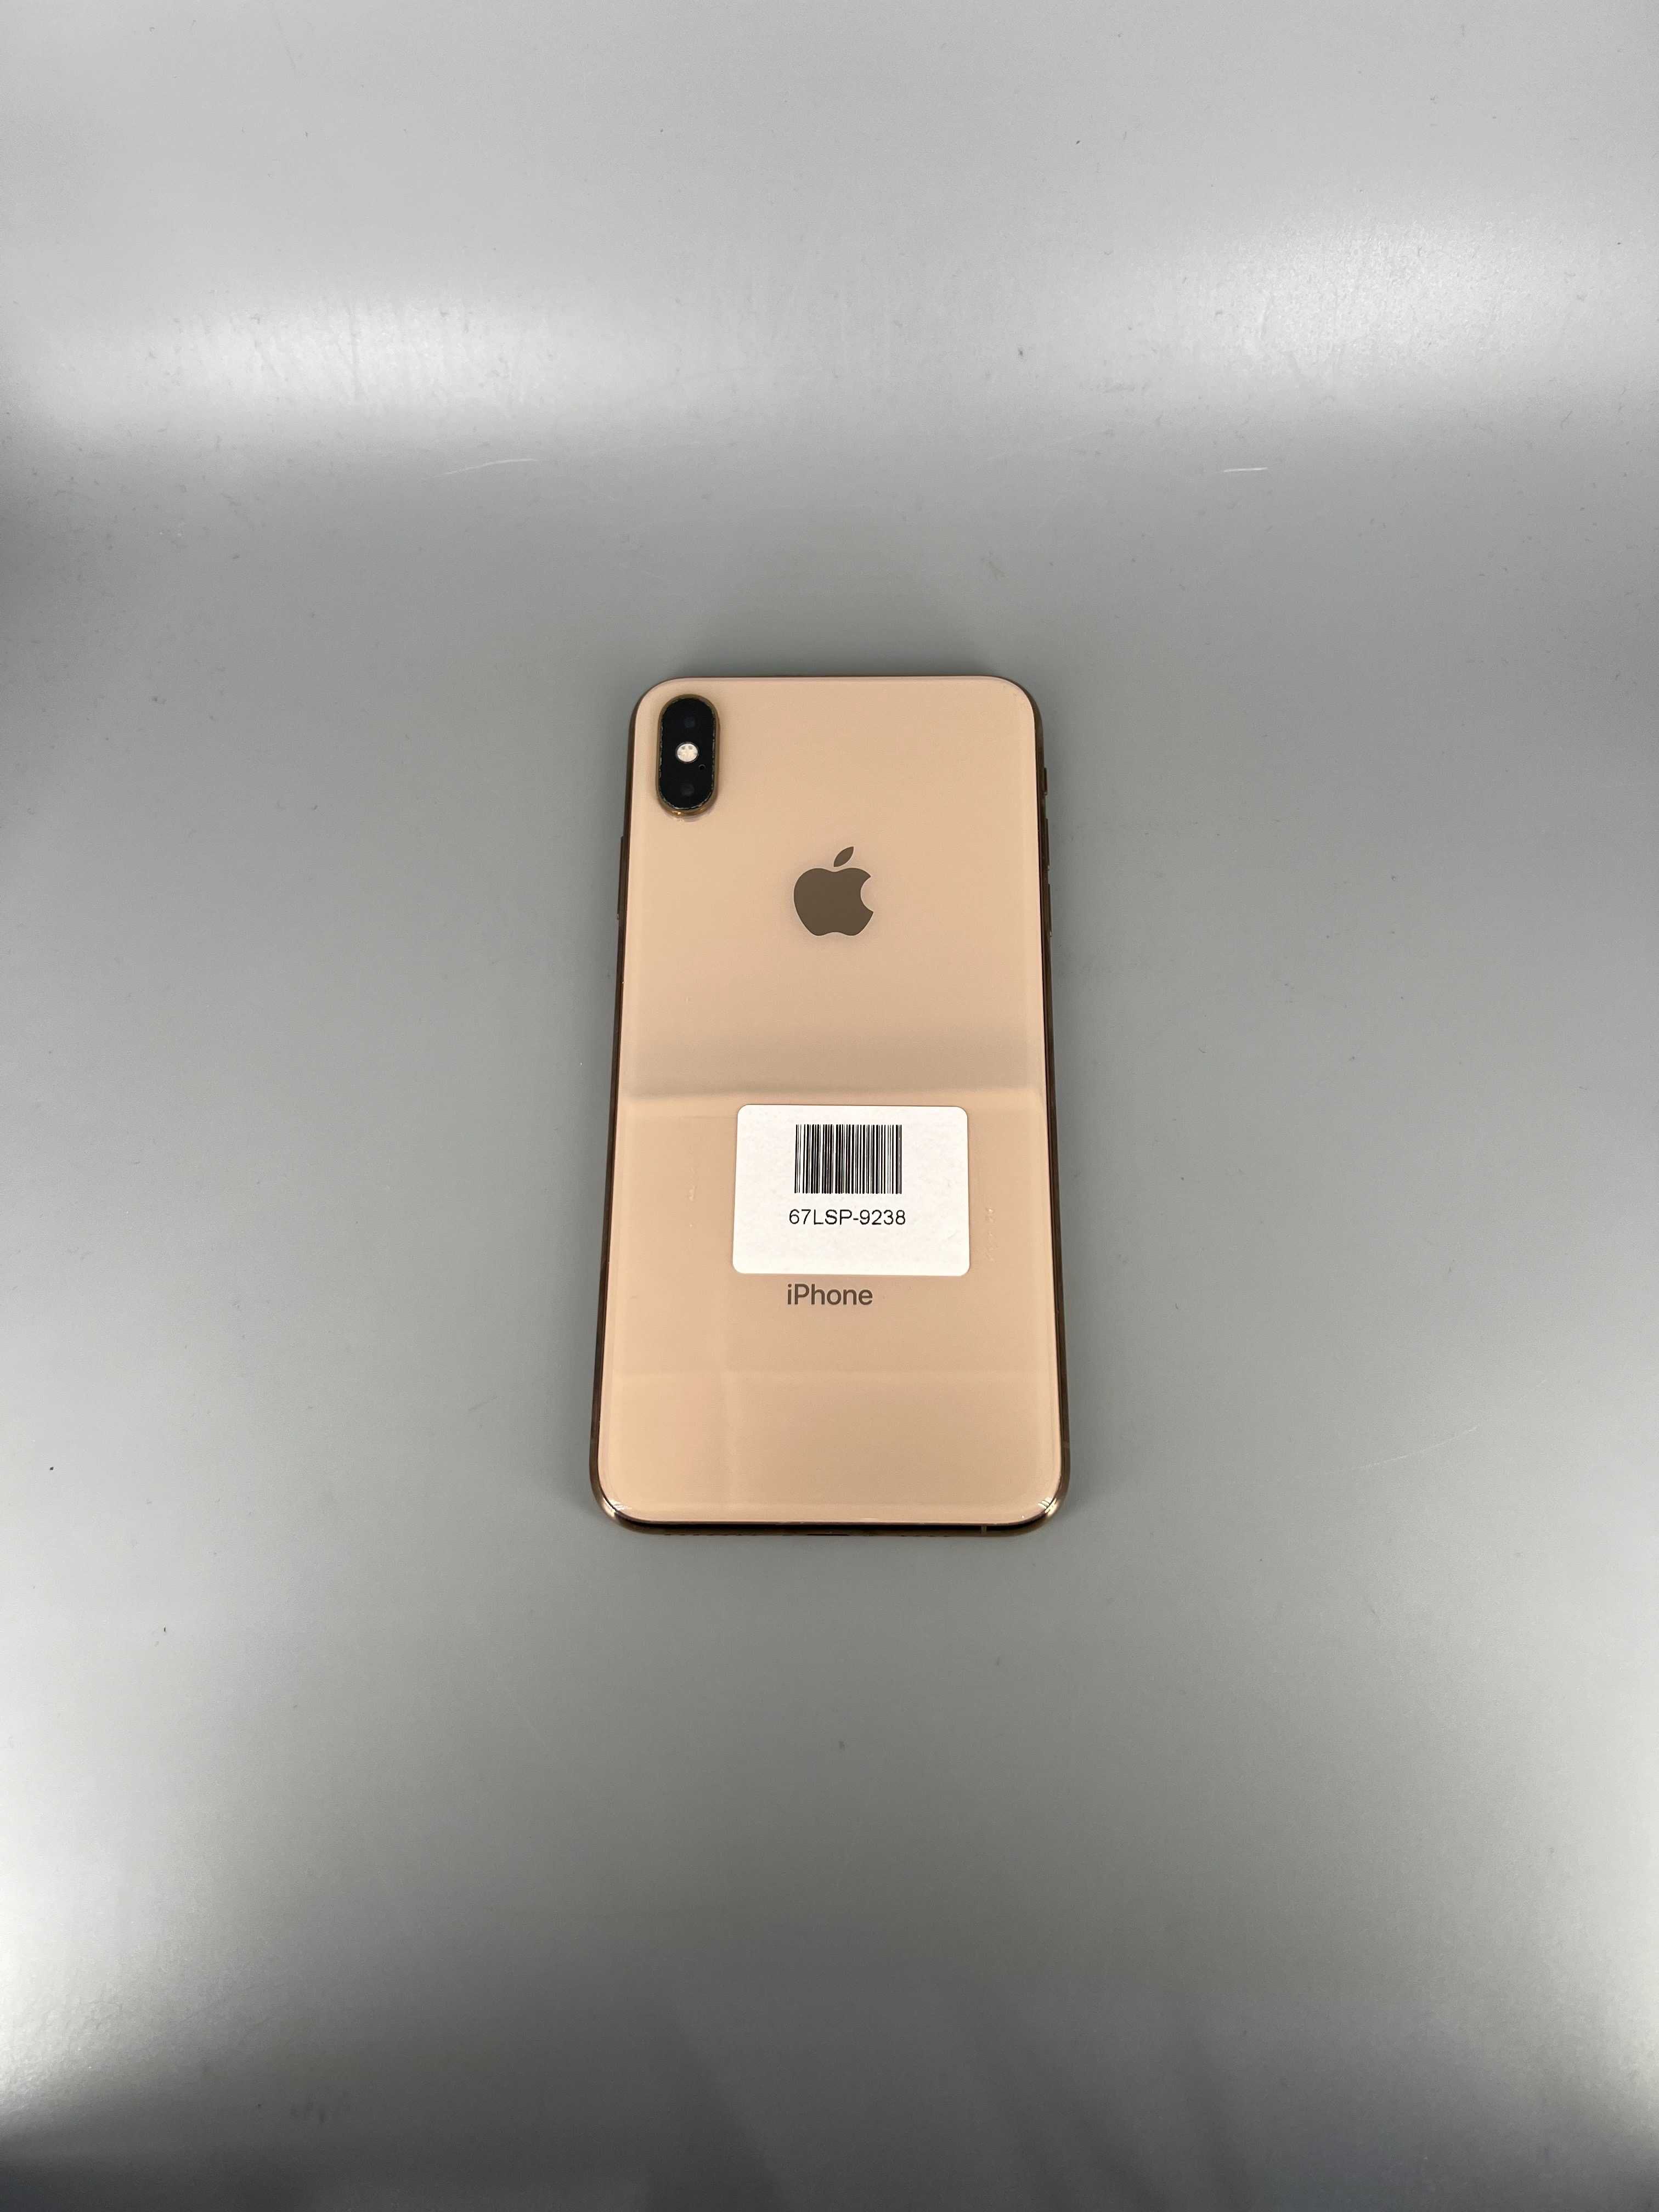 Used iPhone XS Max 256GB Gold 67LSP-9238